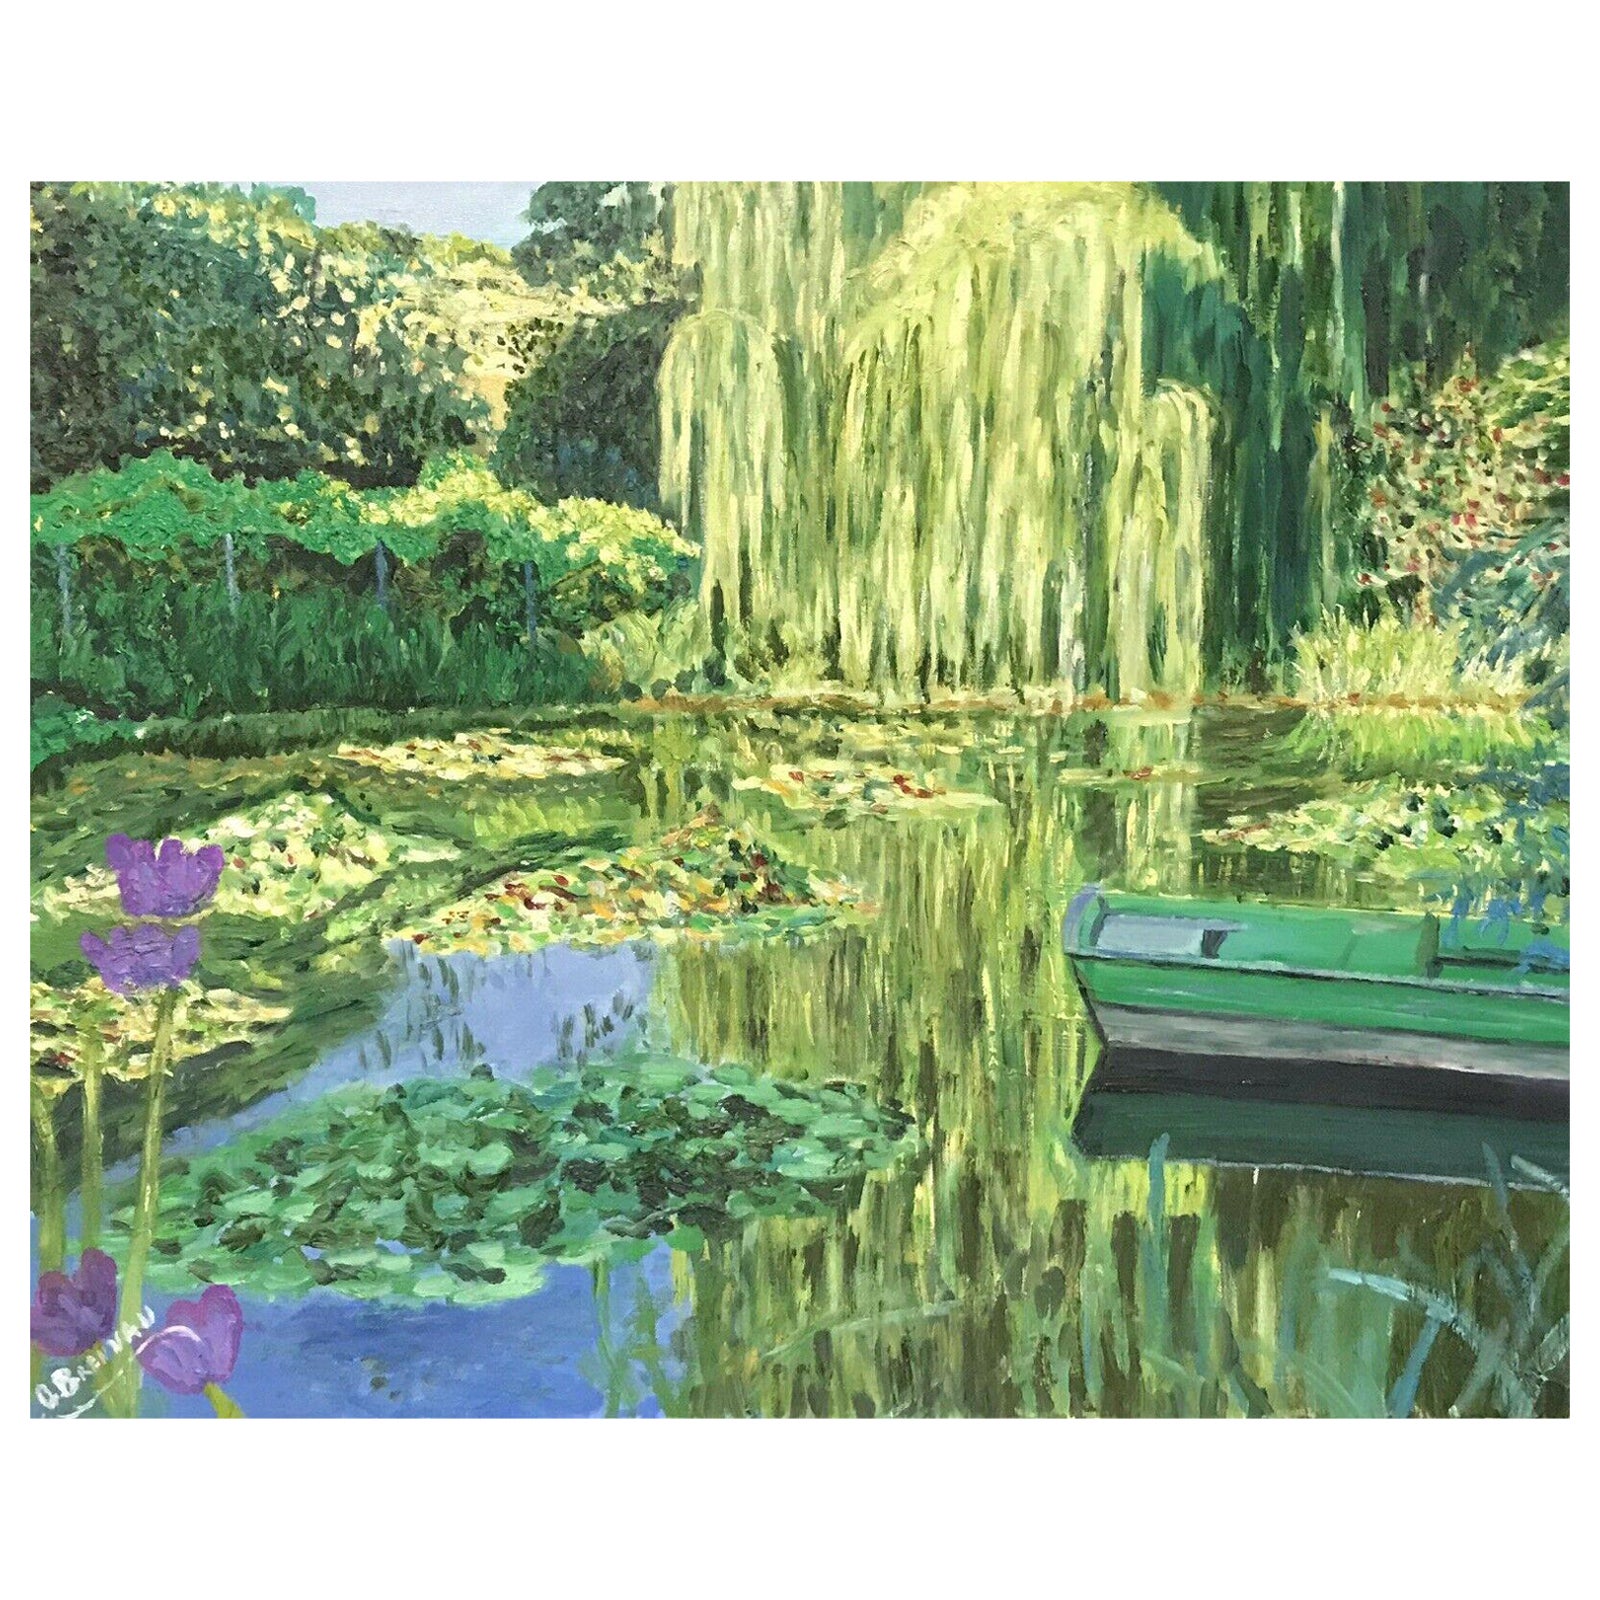 French Impressionist Landscape Painting - MONET'S GARDEN WATERLILY POND GIVERNY  SIGNED IMPRESSIONIST OIL PAINTING